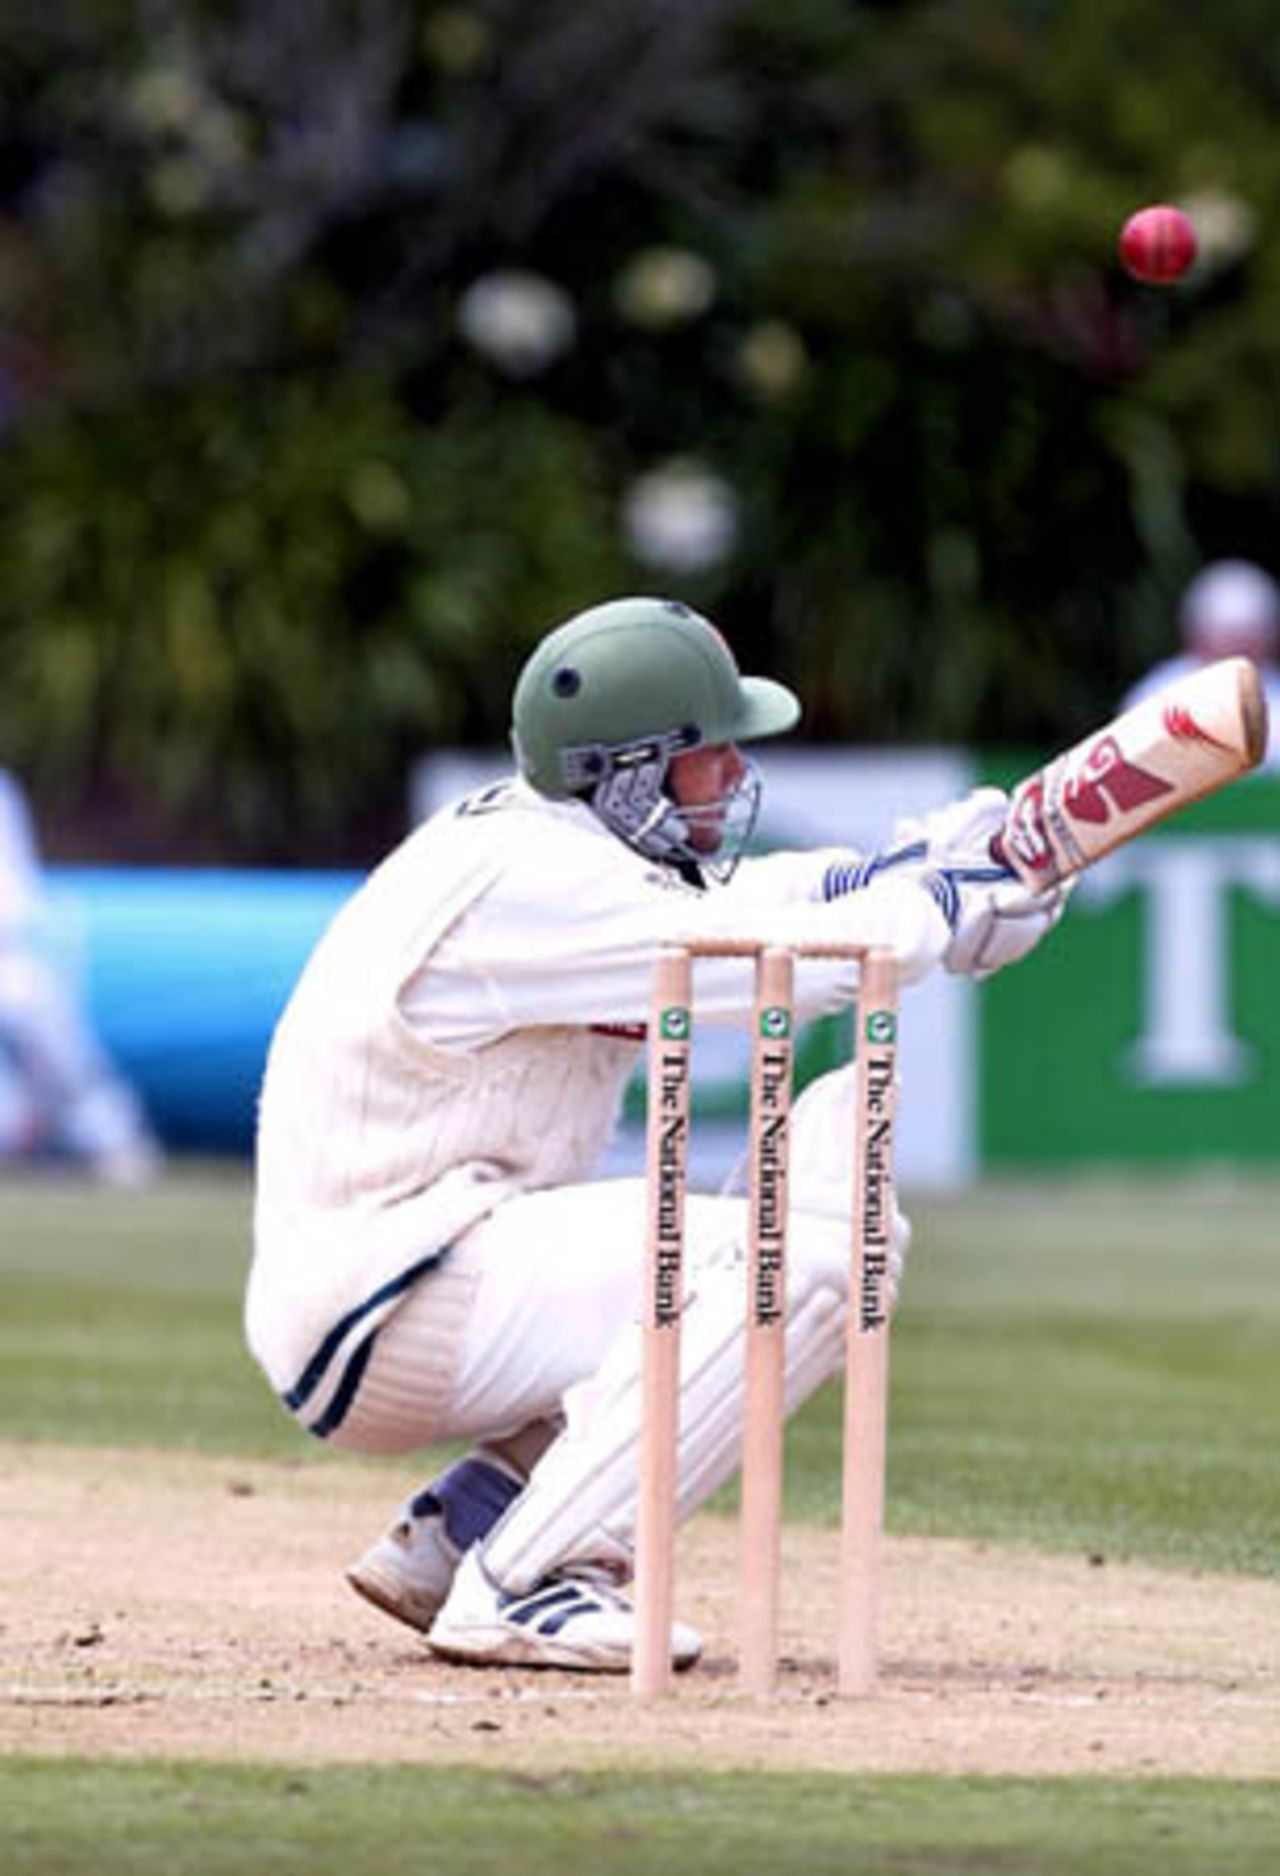 Bangladeshi batsman Khaled Mashud ducks underneath a bouncer delivered by Auckland bowler Andre Adams during his innings of 30 not out. Tour match: Auckland v Bangladeshis at Eden Park Outer Oval, Auckland, 12-15 Dec 2001 (12 December 2001).